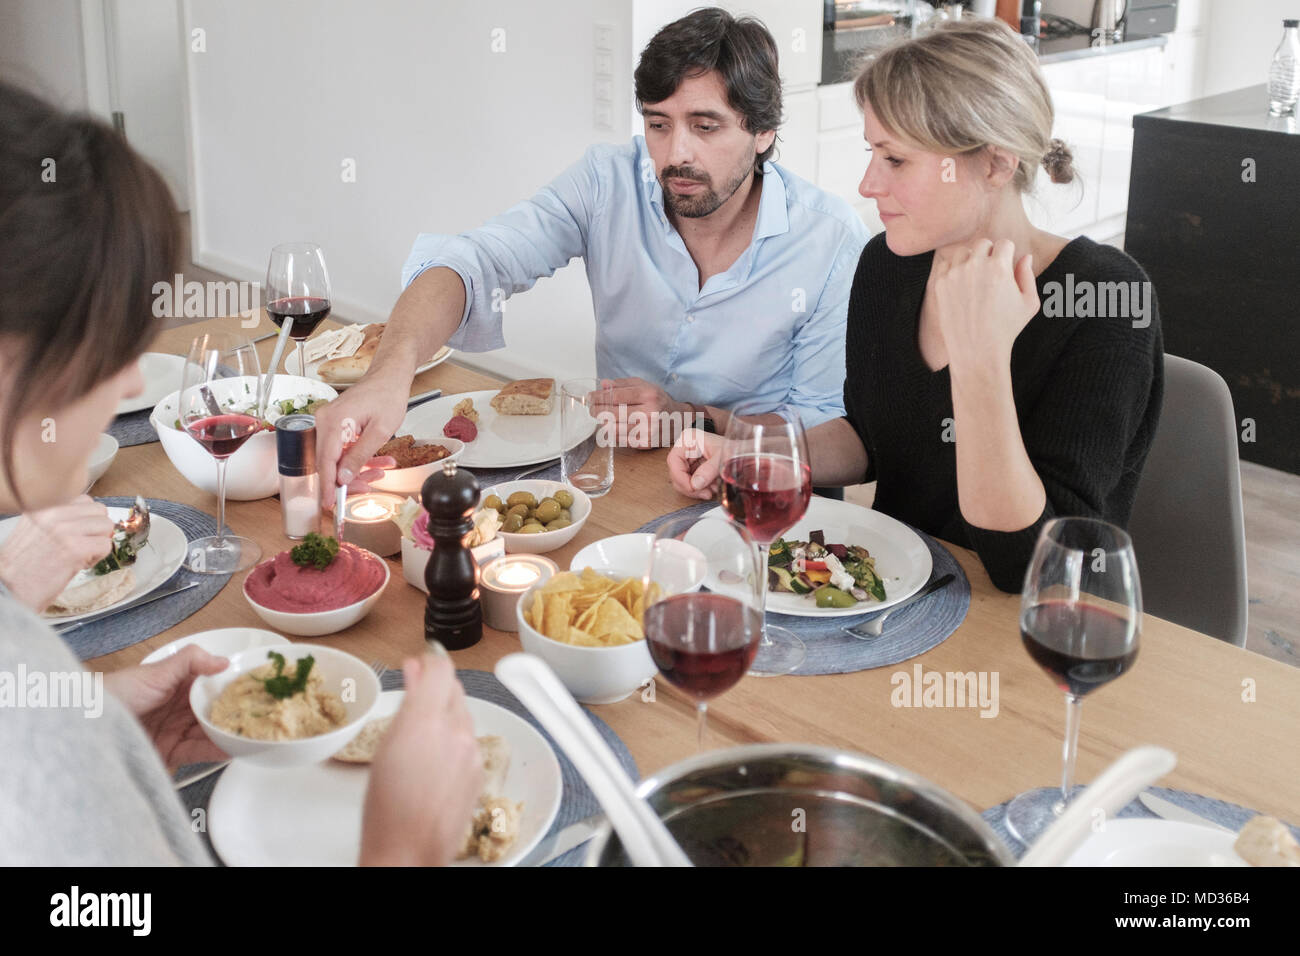 Vegetarian lunch.Group of friends casually snacking on a selection of food while laughing and enjoying themselves. Stock Photo